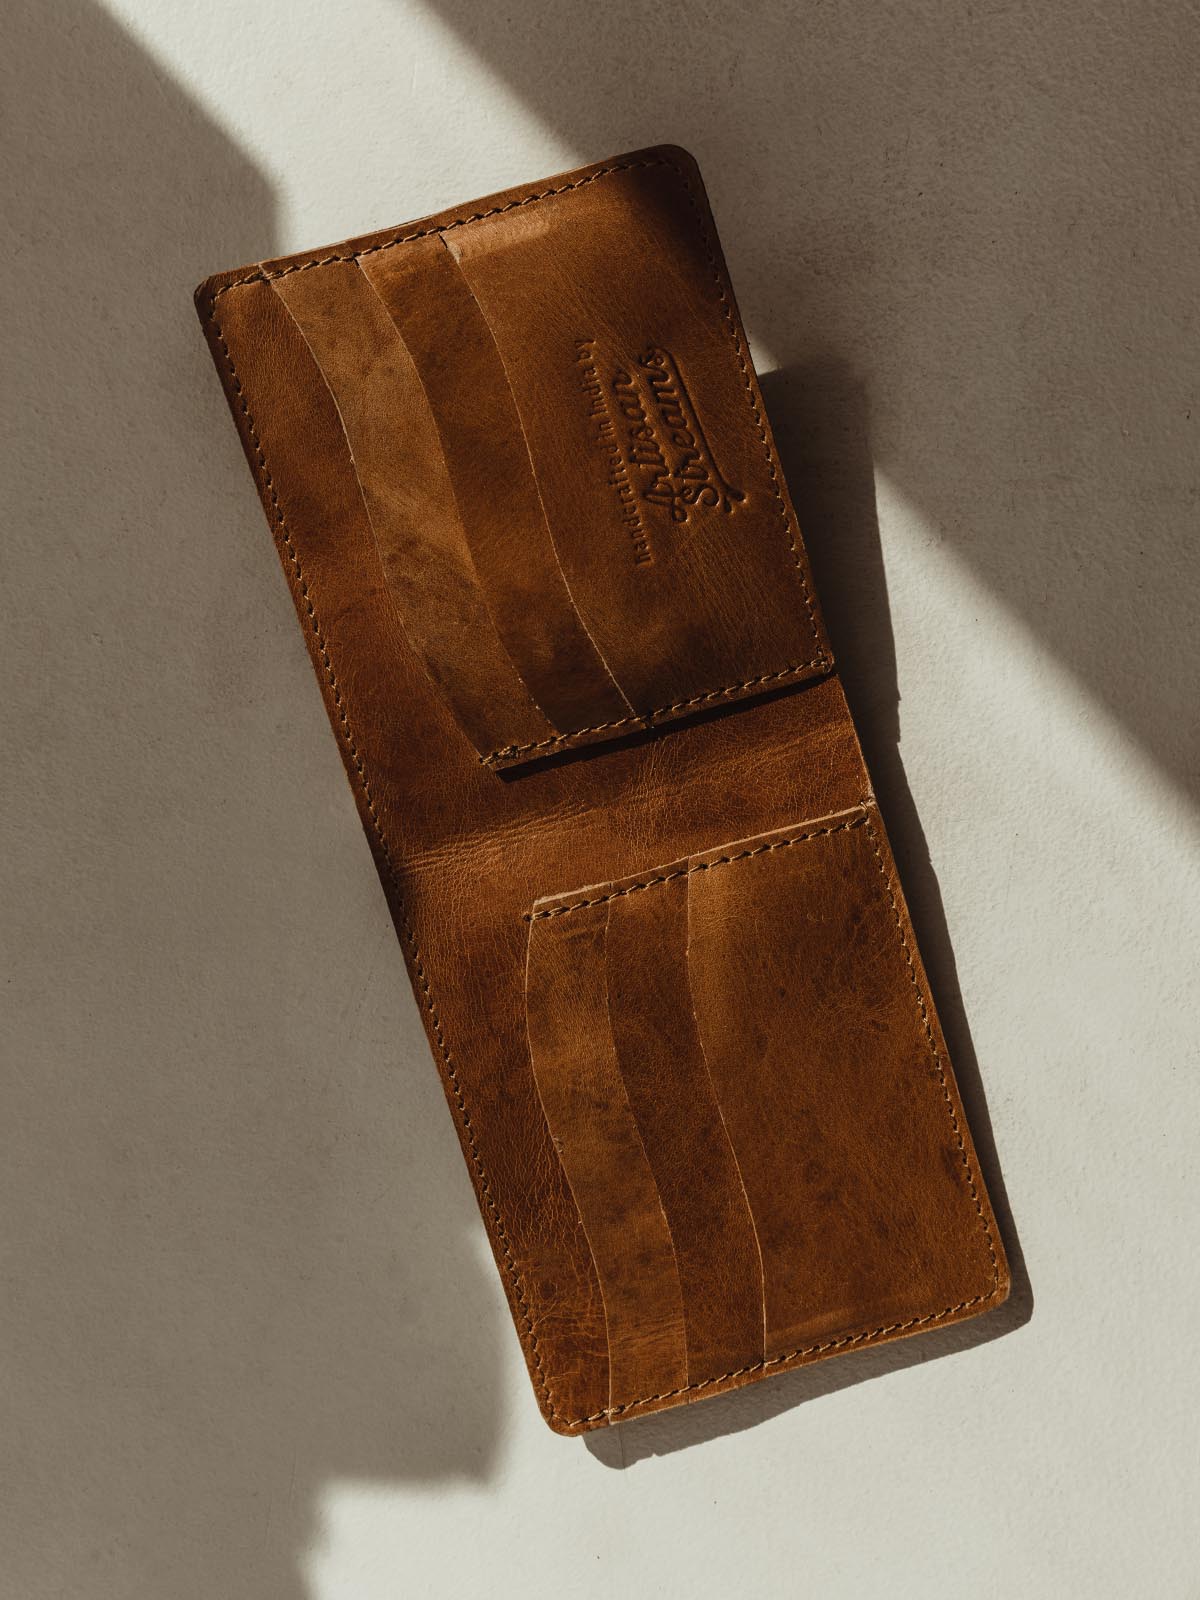 Open hazelnut colored wallet on cream background. Six small pockets for cards or IDs.